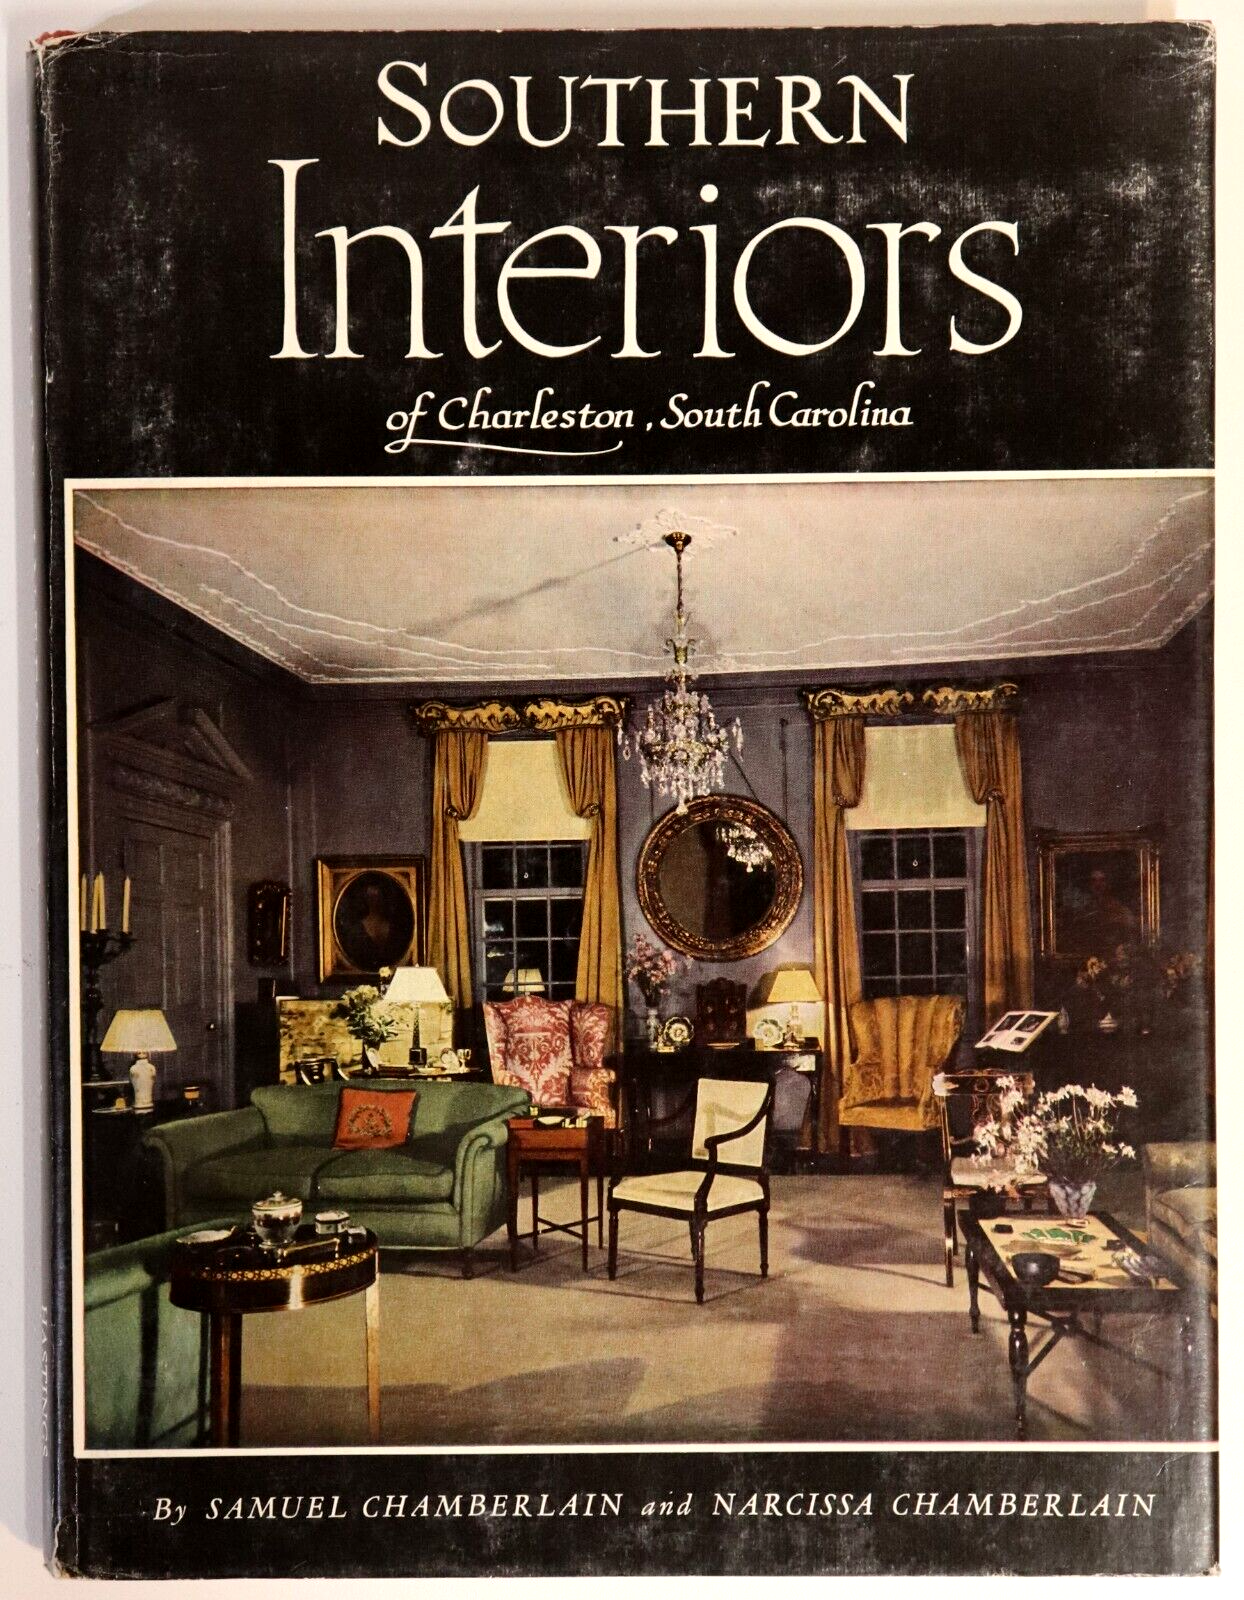 Southern Interiors Of Charleston - 1956 - Vintage American Architecture Book